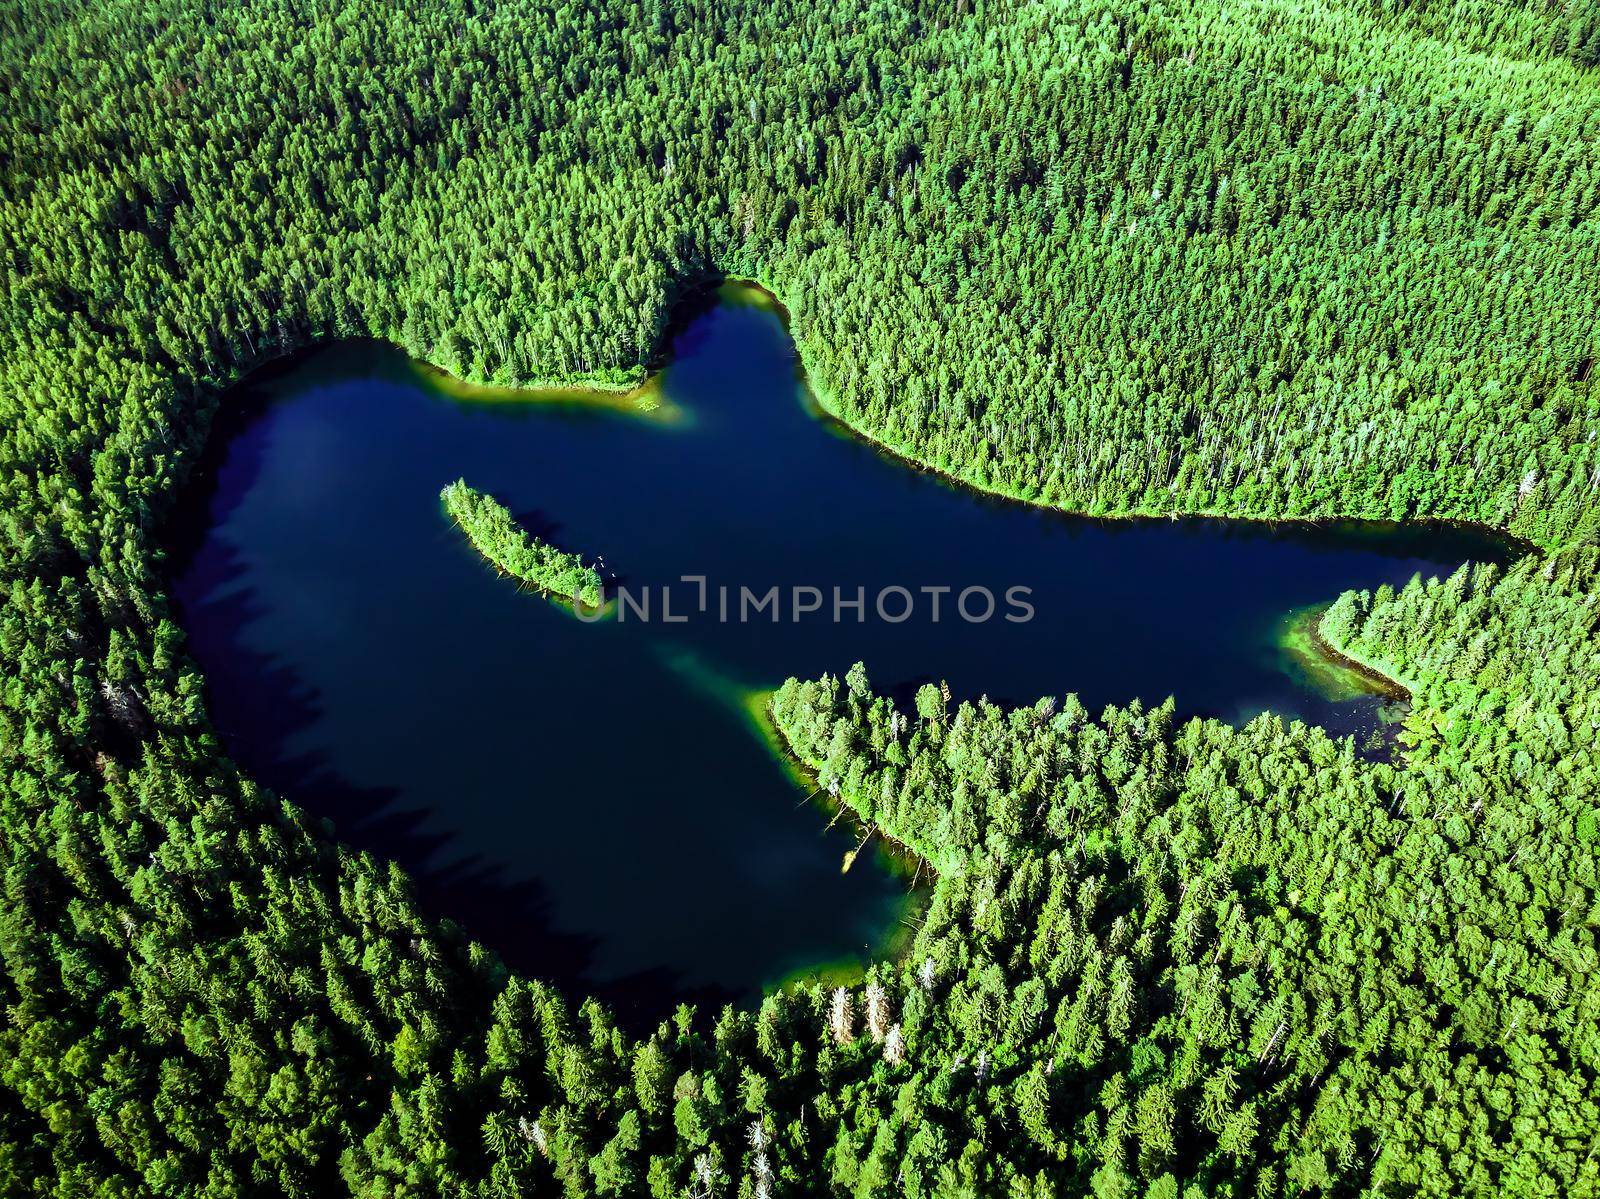 Top view of a forest lake